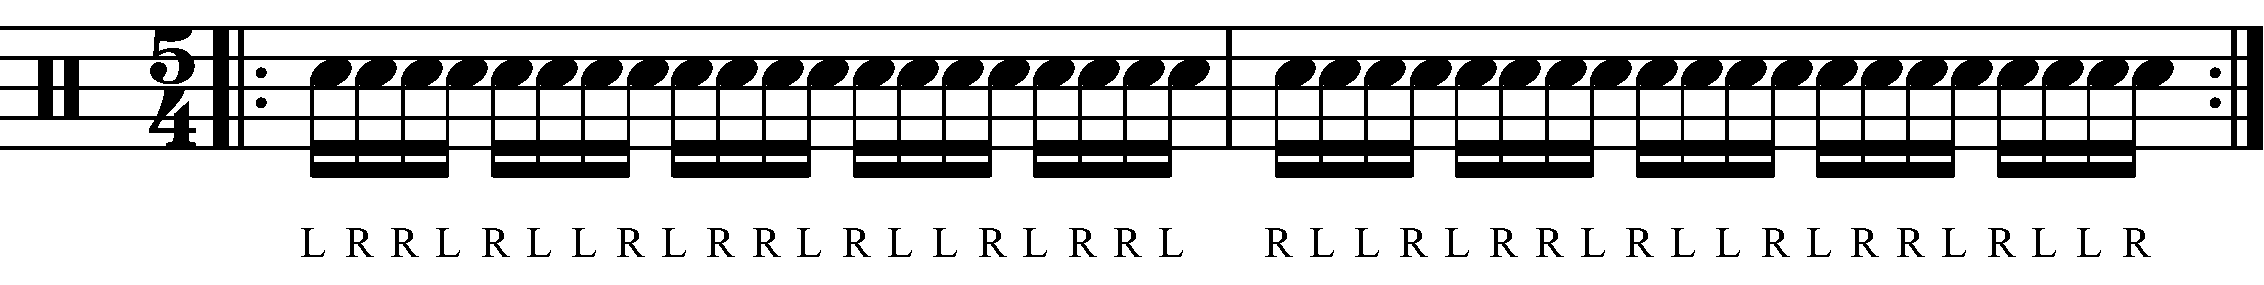 An Inverted Paradiddle in 3/4 with reverse sticking